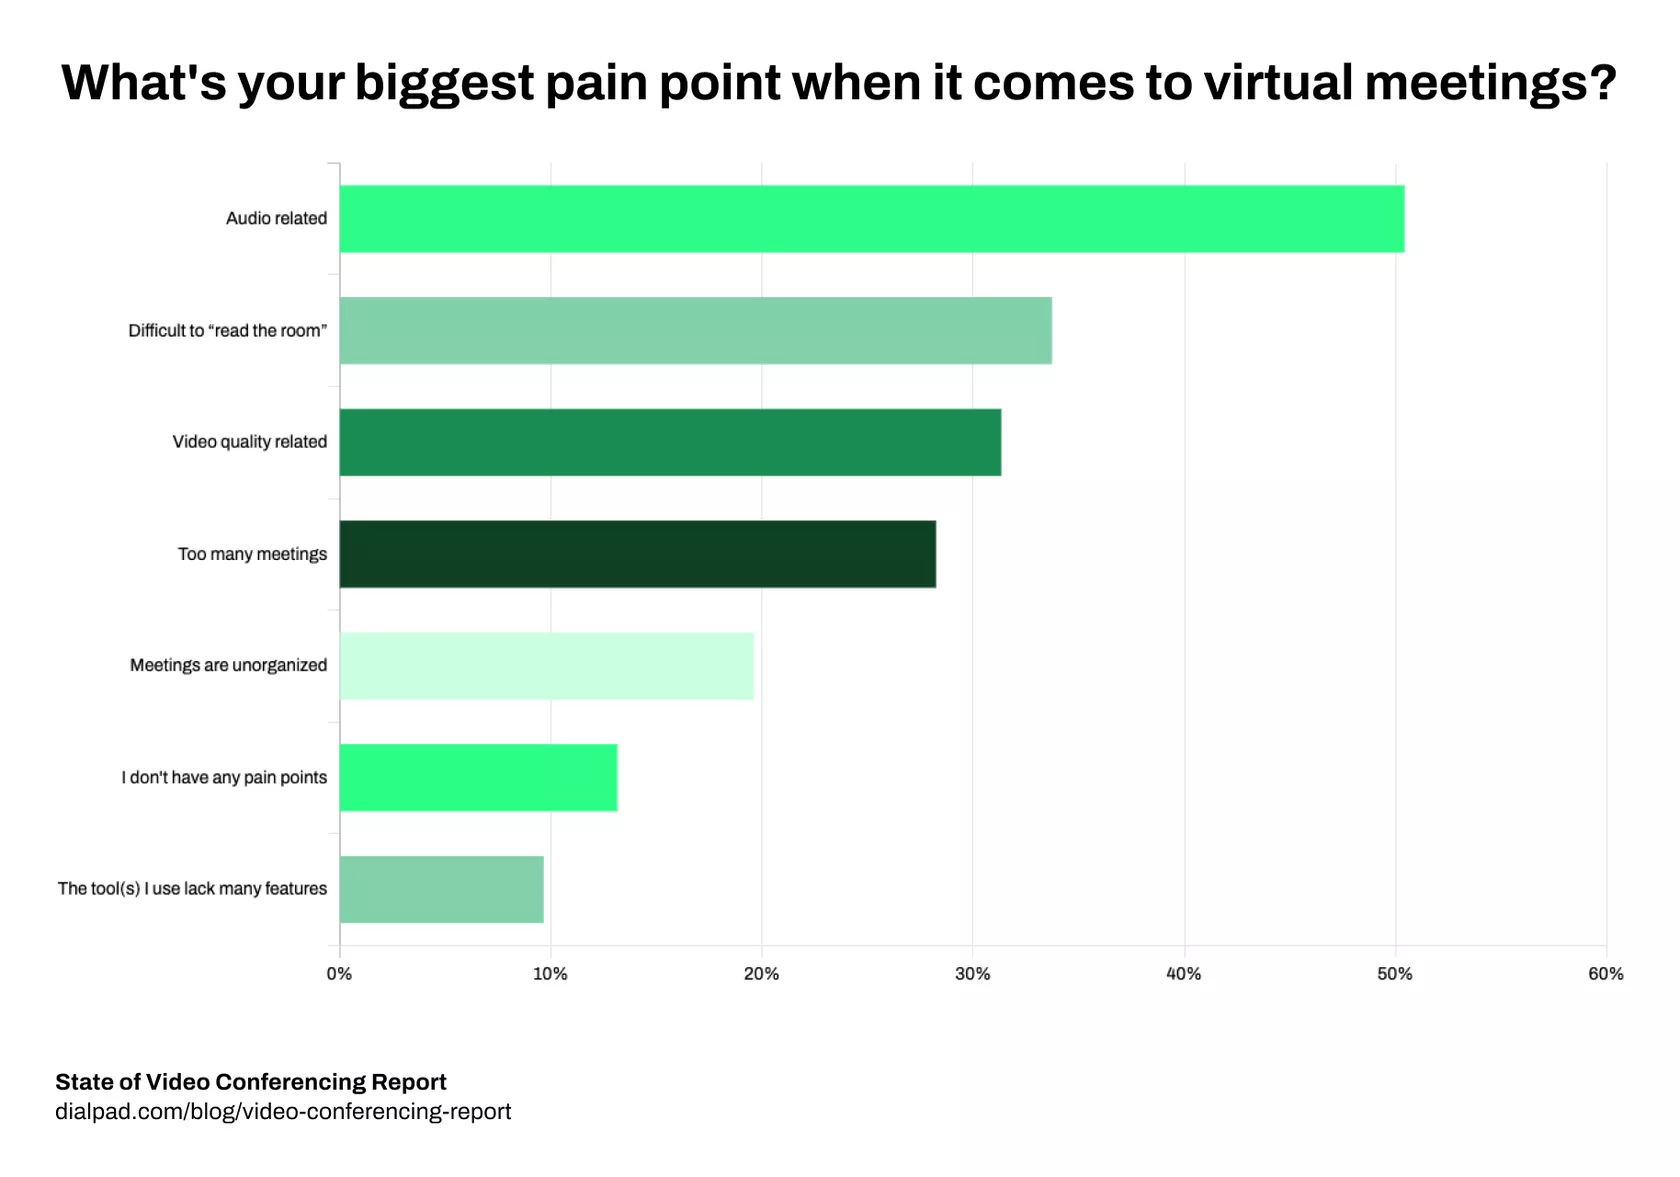 What's your biggest pain point when it comes to virtual meetings?